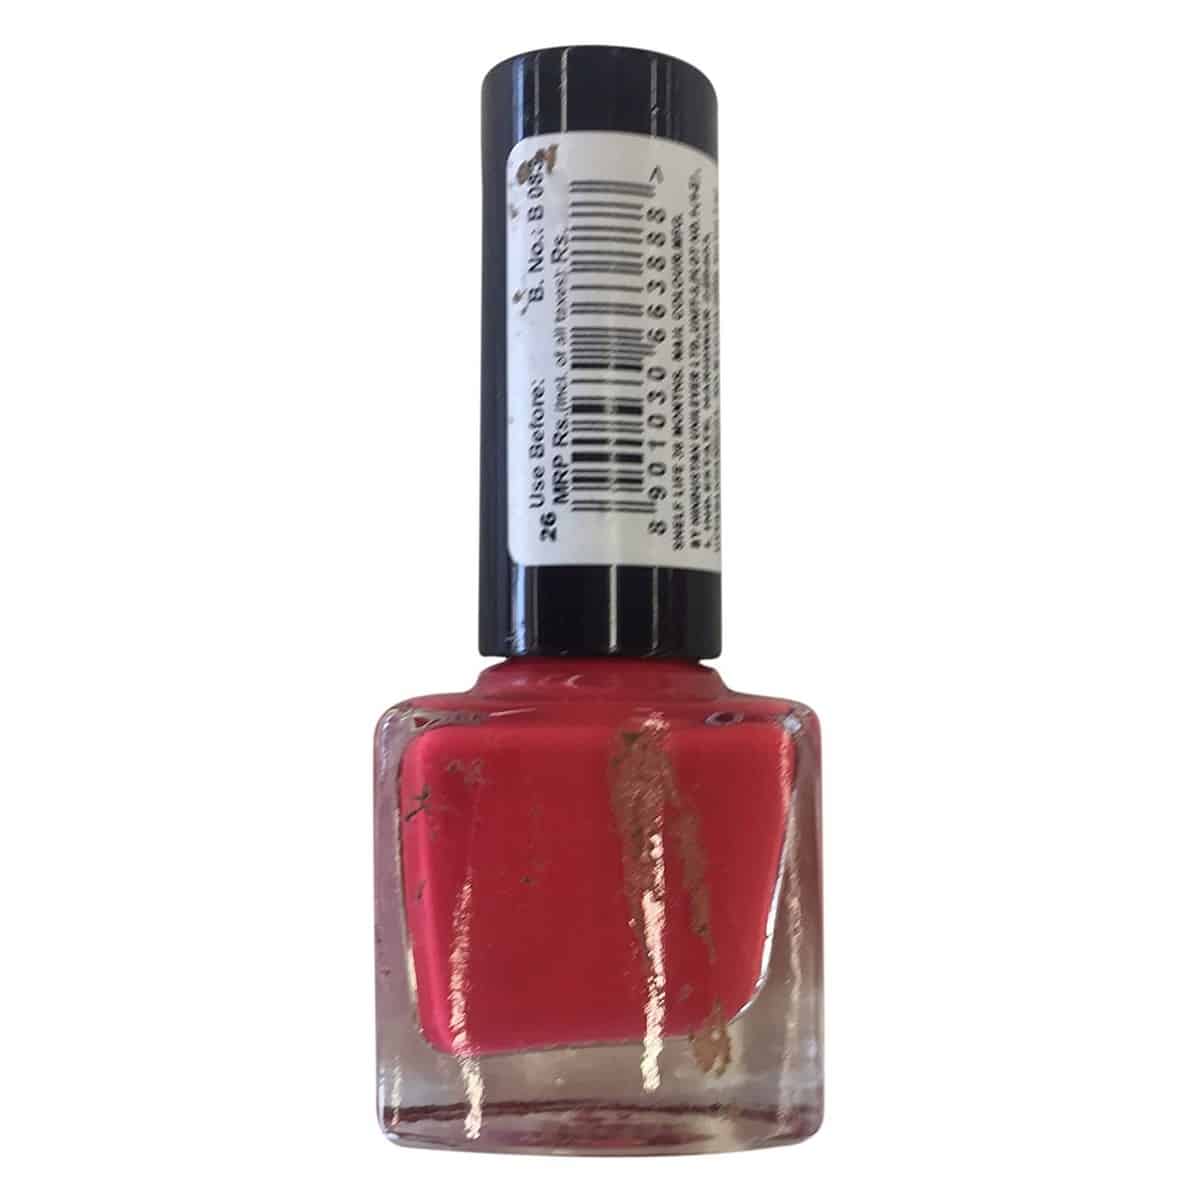 Buy Elle 18 Nail Pops Nail Polish, Glossy Finish, Shade 25, 5 Ml Online at  Low Prices in India - Amazon.in